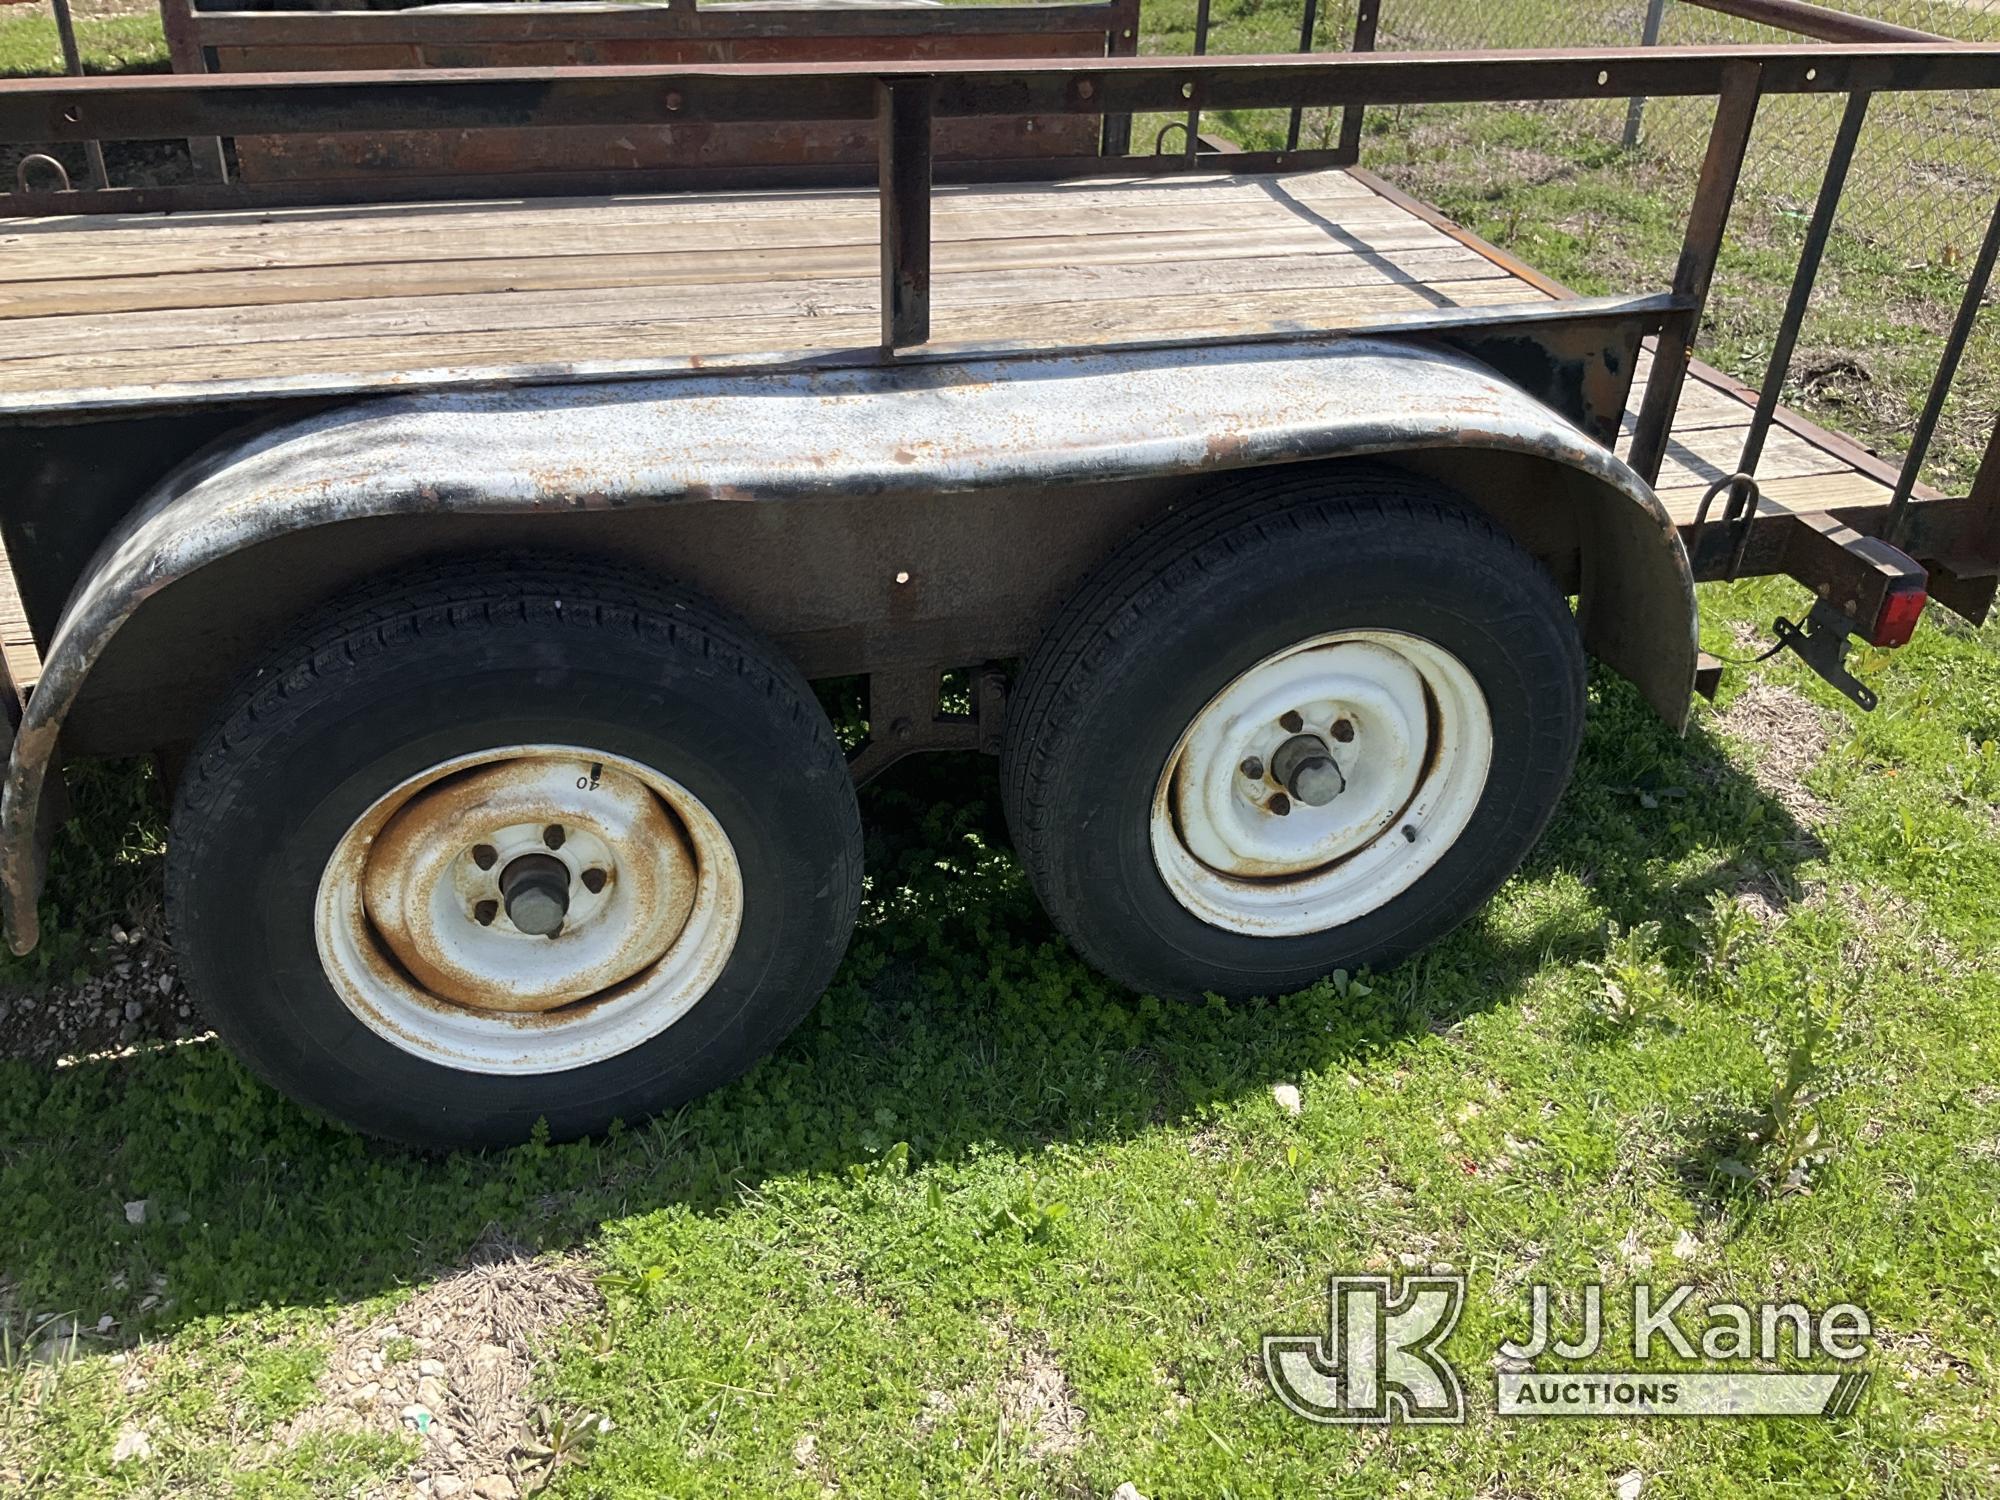 (Waxahachie, TX) 1995 Jones T/A Tagalong Flatbed Trailer, City of Plano Owned No Title